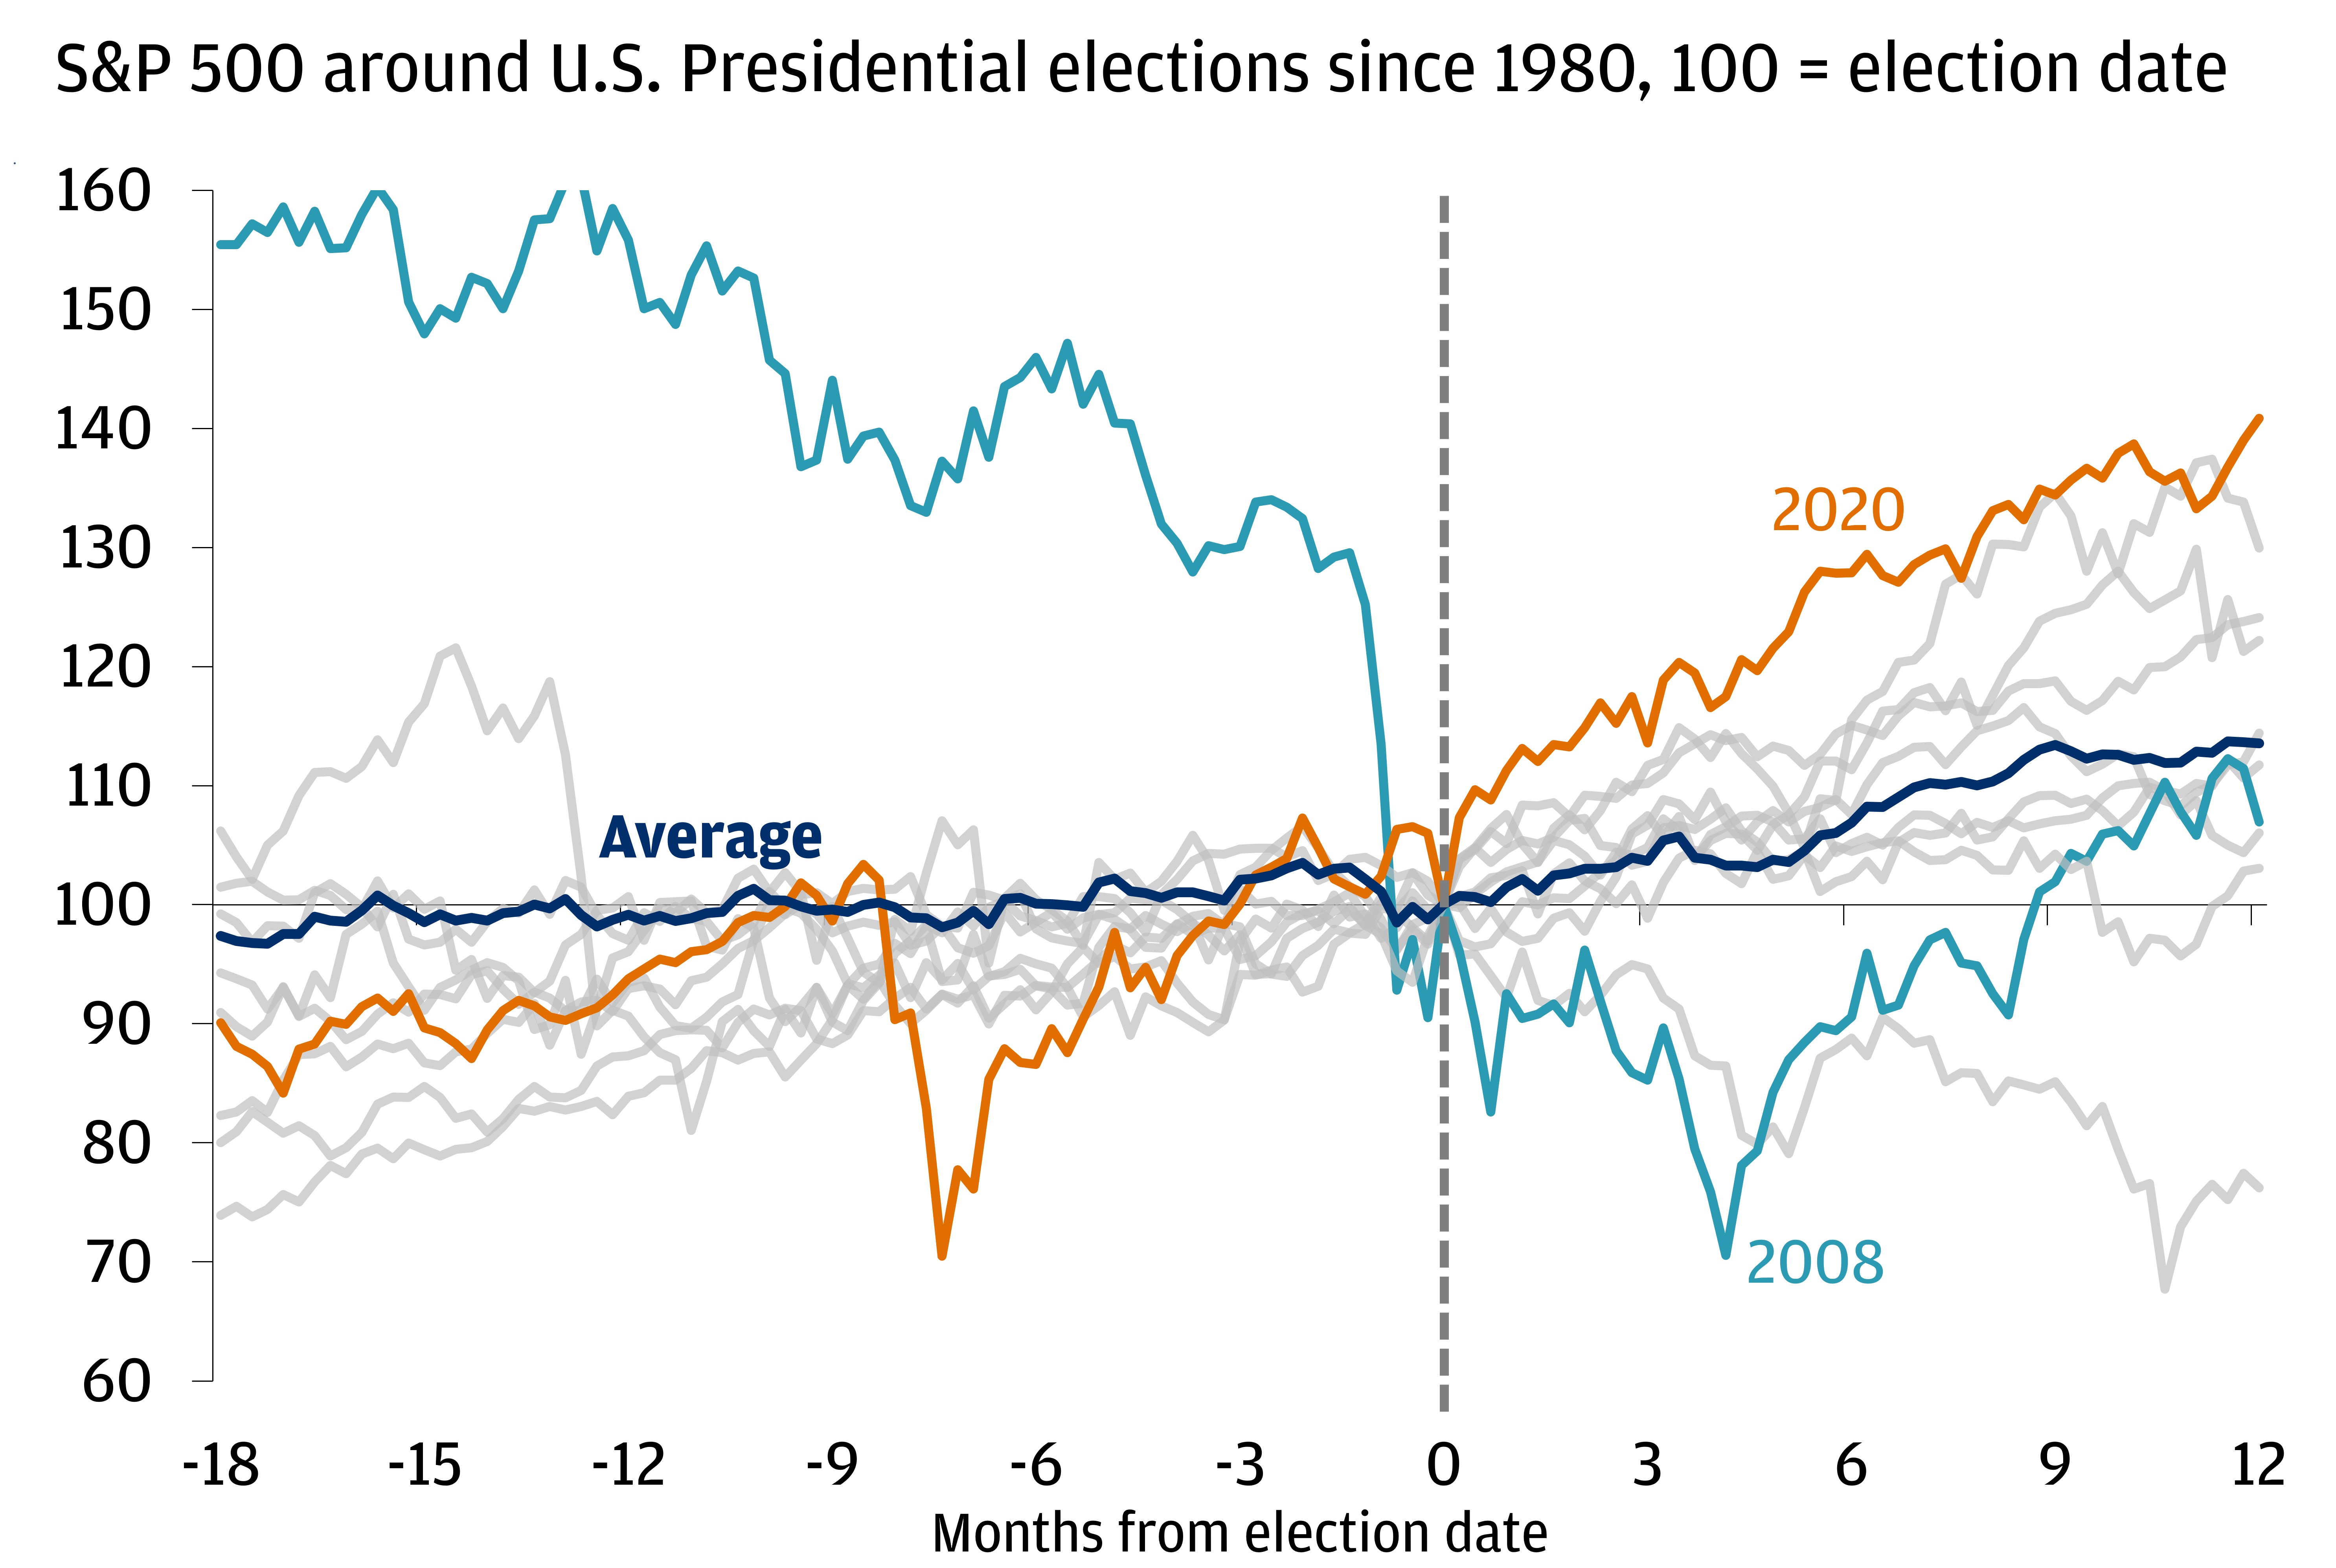 Stocks tend to be volatile heading into an election, and rally thereafter